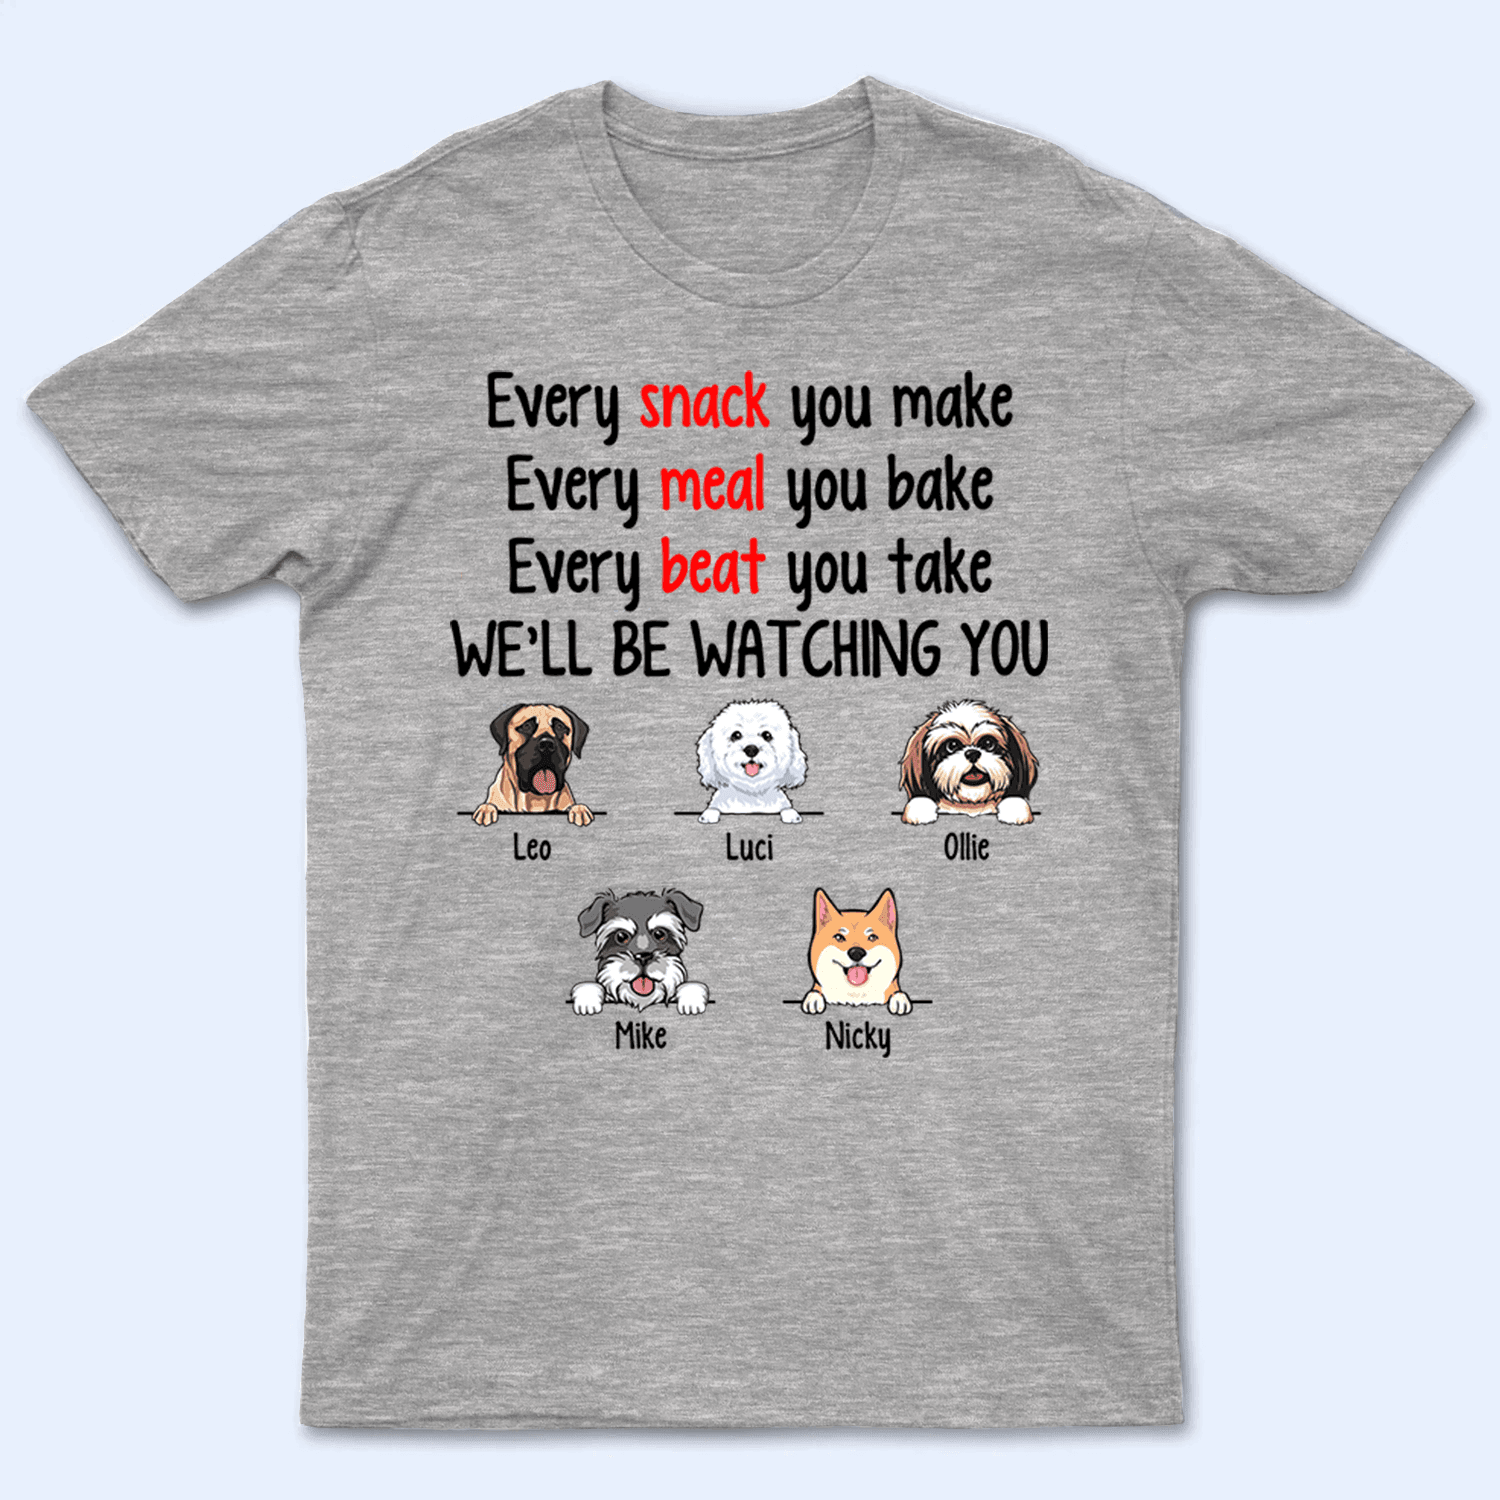 Every Snack You Make Funny Dogs - Personalized Custom T Shirt - Personalized Custom T Shirt - Birthday, Loving, Funny Gift for Dog Mom, Dog Dad, Dog Lovers, Pet Gifts for Him, Her - Suzitee Store